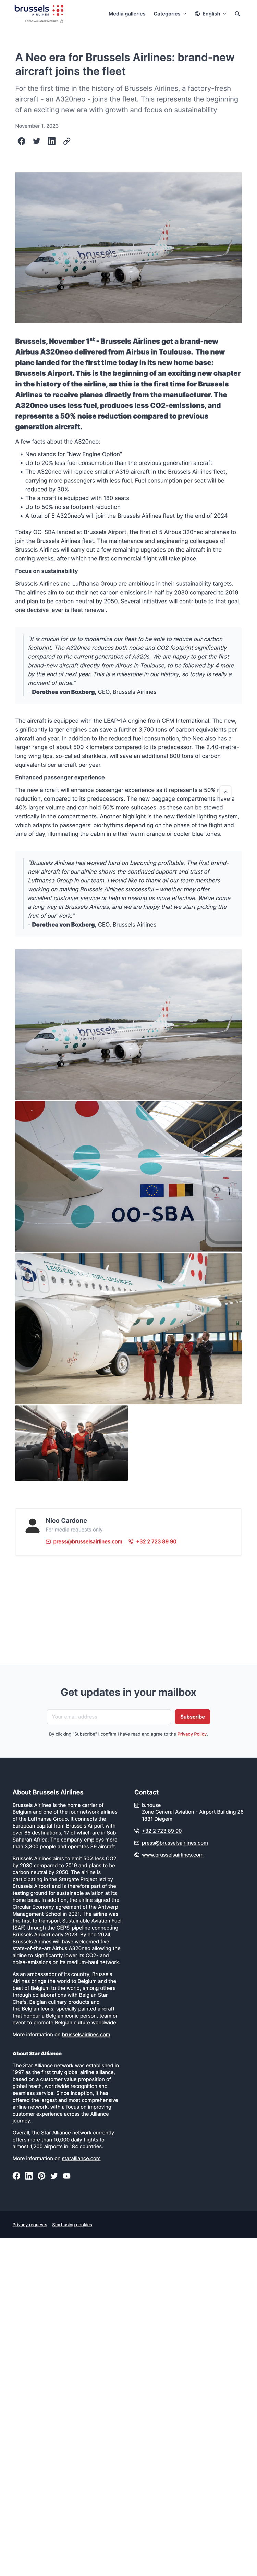 [TEST] Brand-new aircraft joins the Brussels Airlines fleet